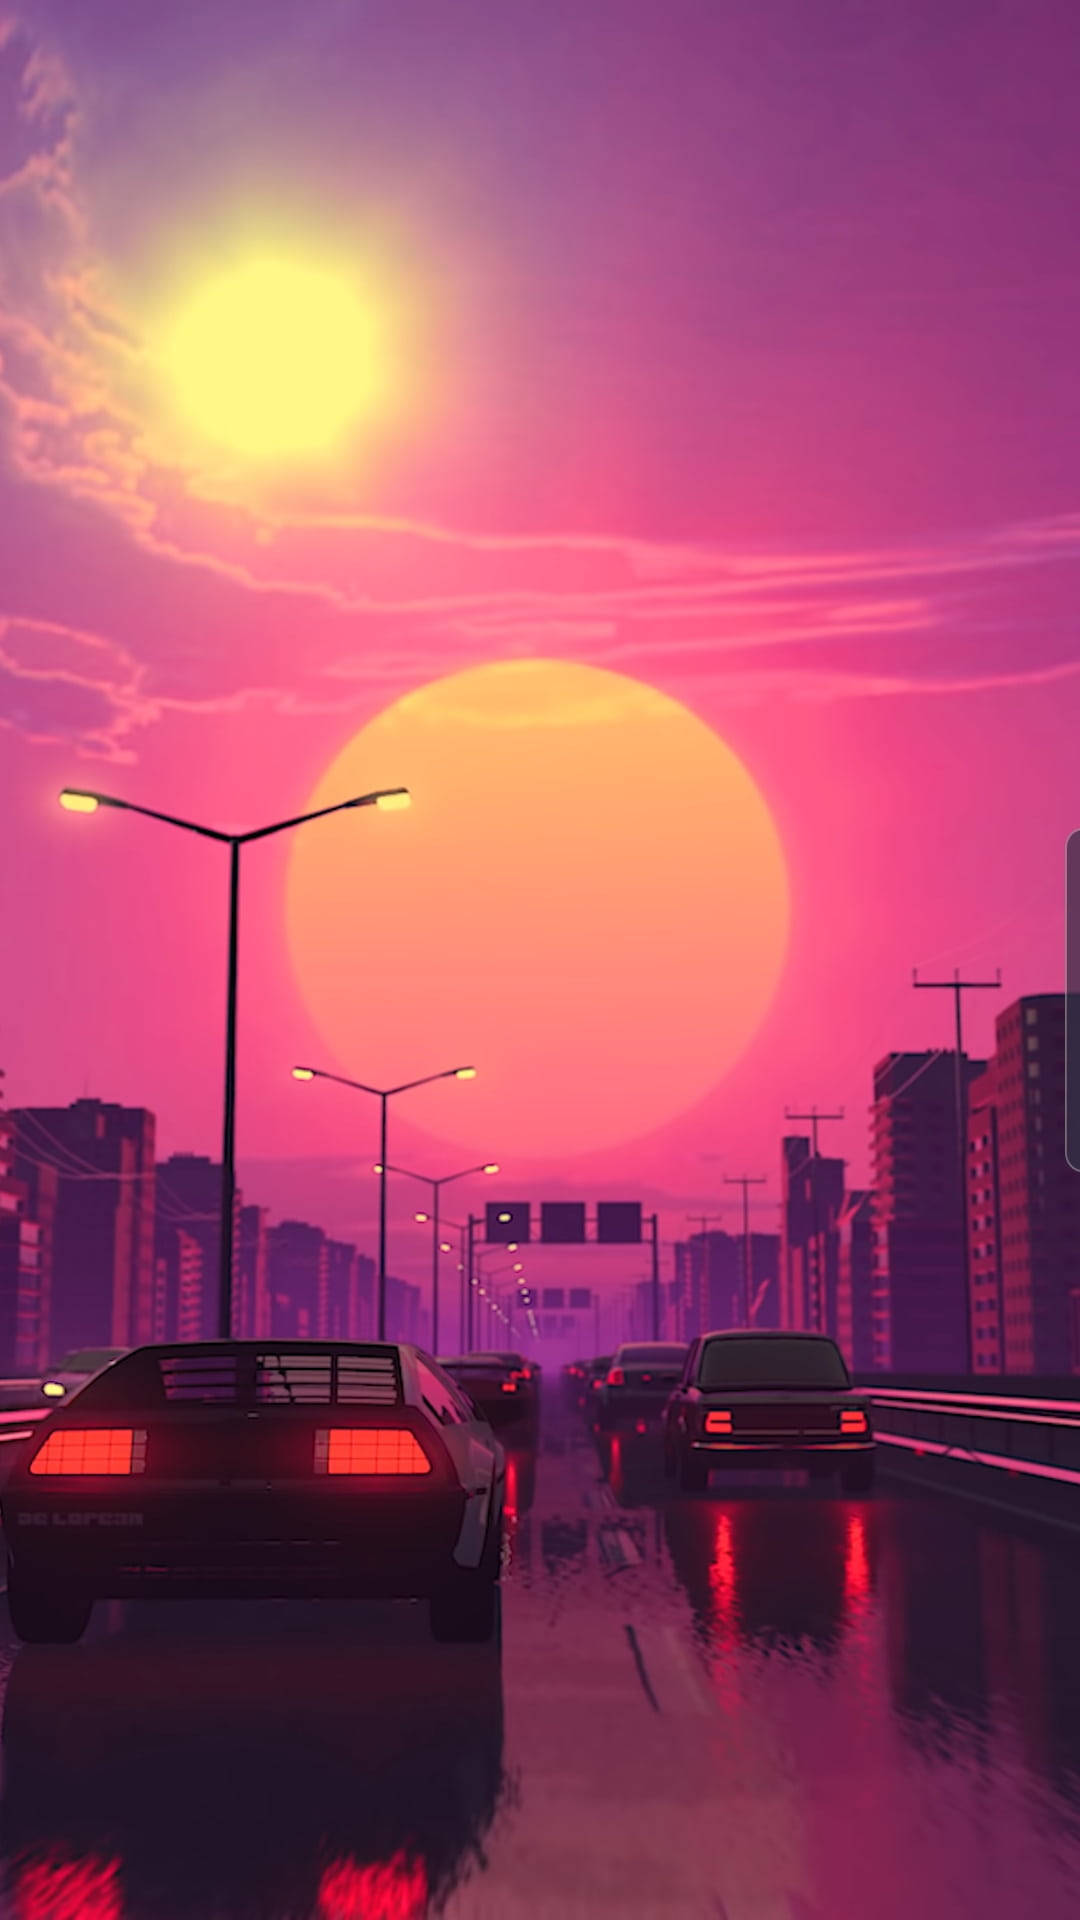 Purple Aesthetic Sunset With Cars Background